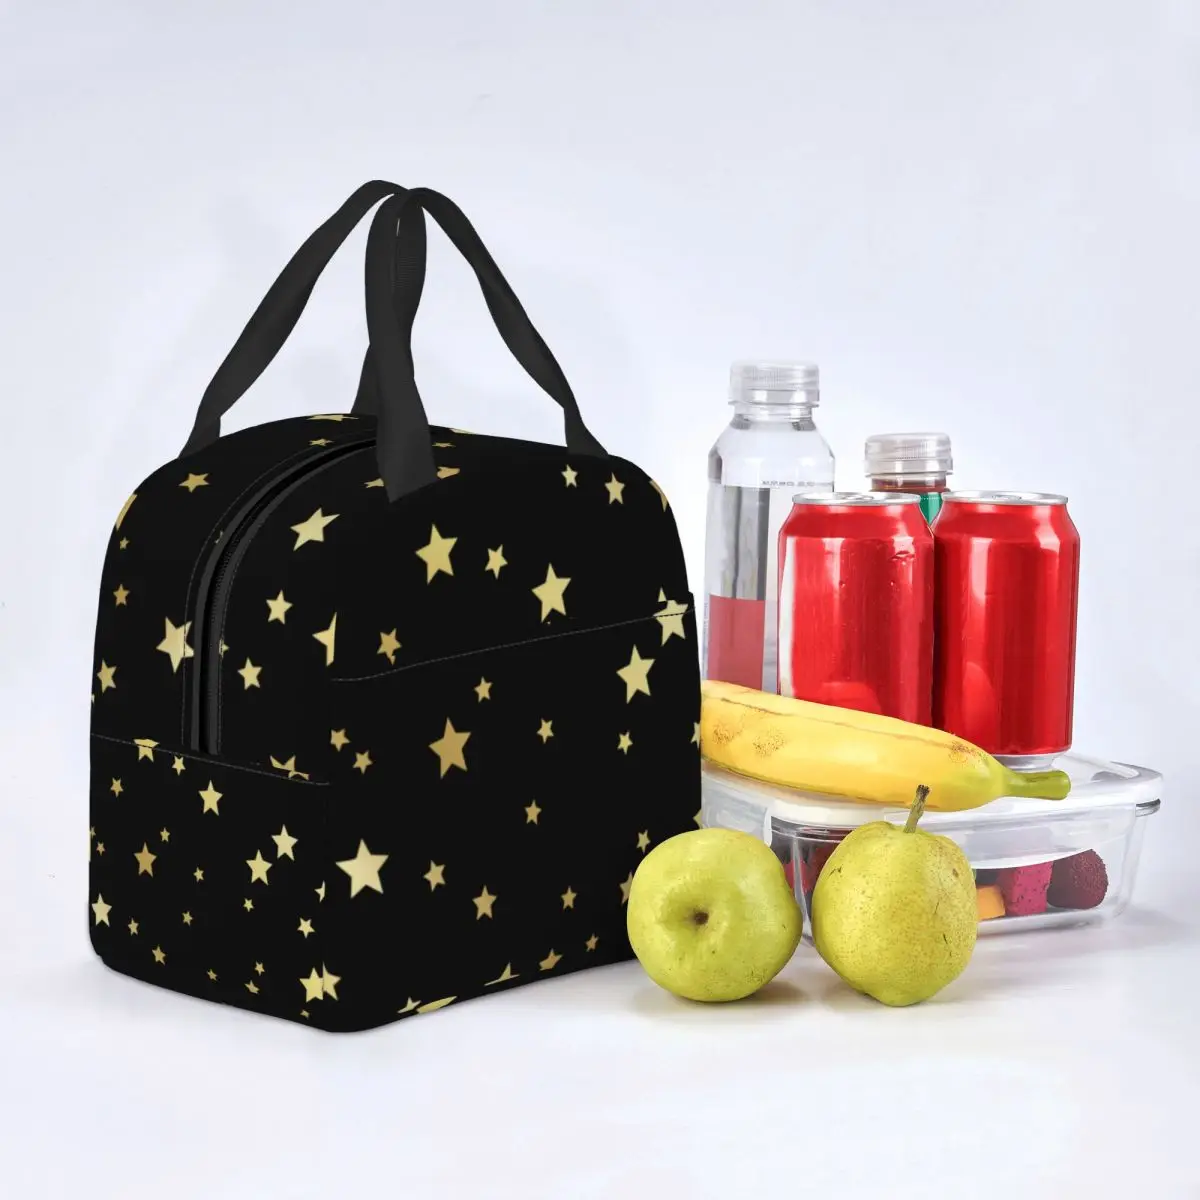 

Gold Star Lunch Bag with Handle Stars Pattern Fancy Cooler Bag Carry Travel Food Thermal Bag